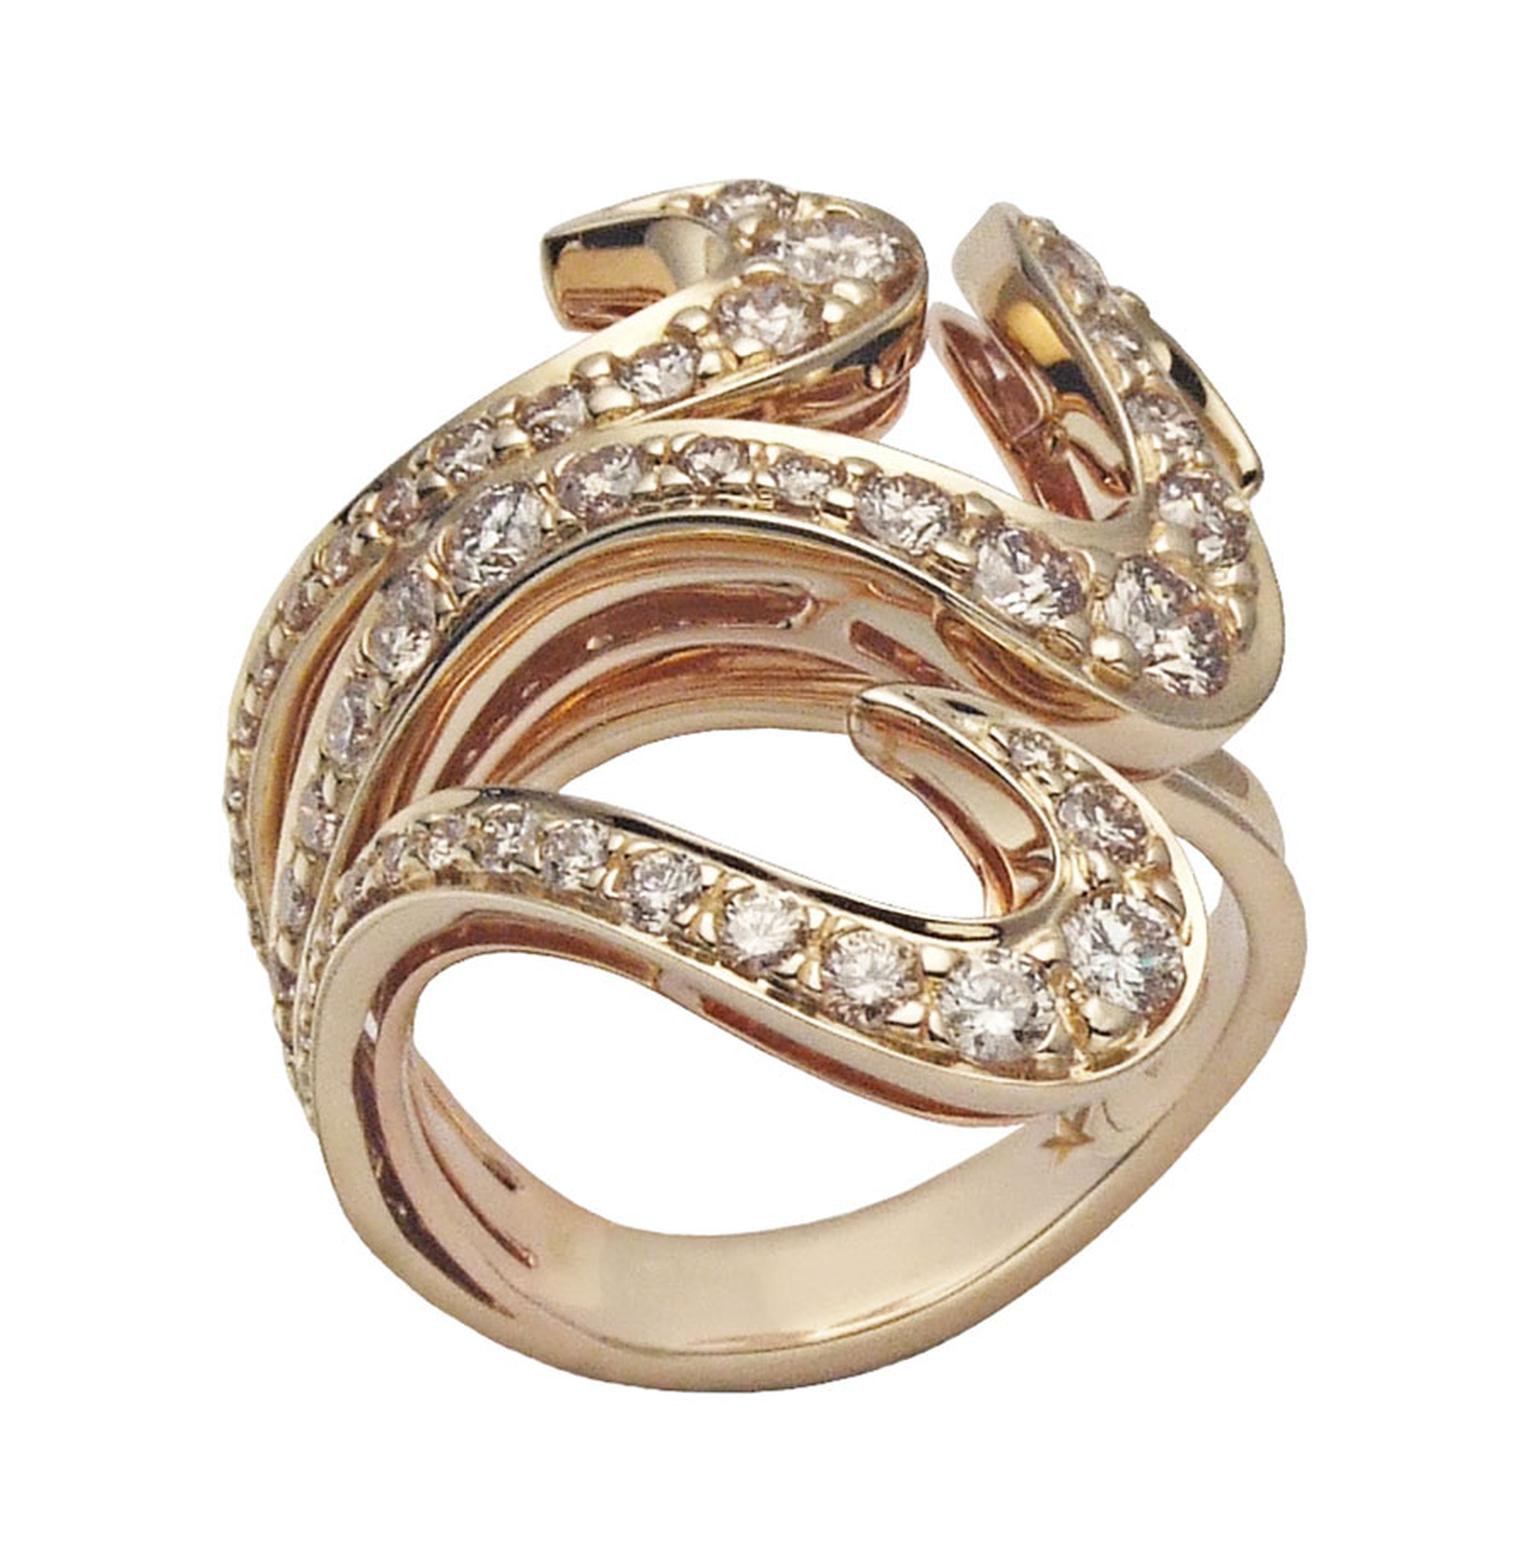 H-Stern-Ring-in-yellow-and-rose-gold-with-diamonds-